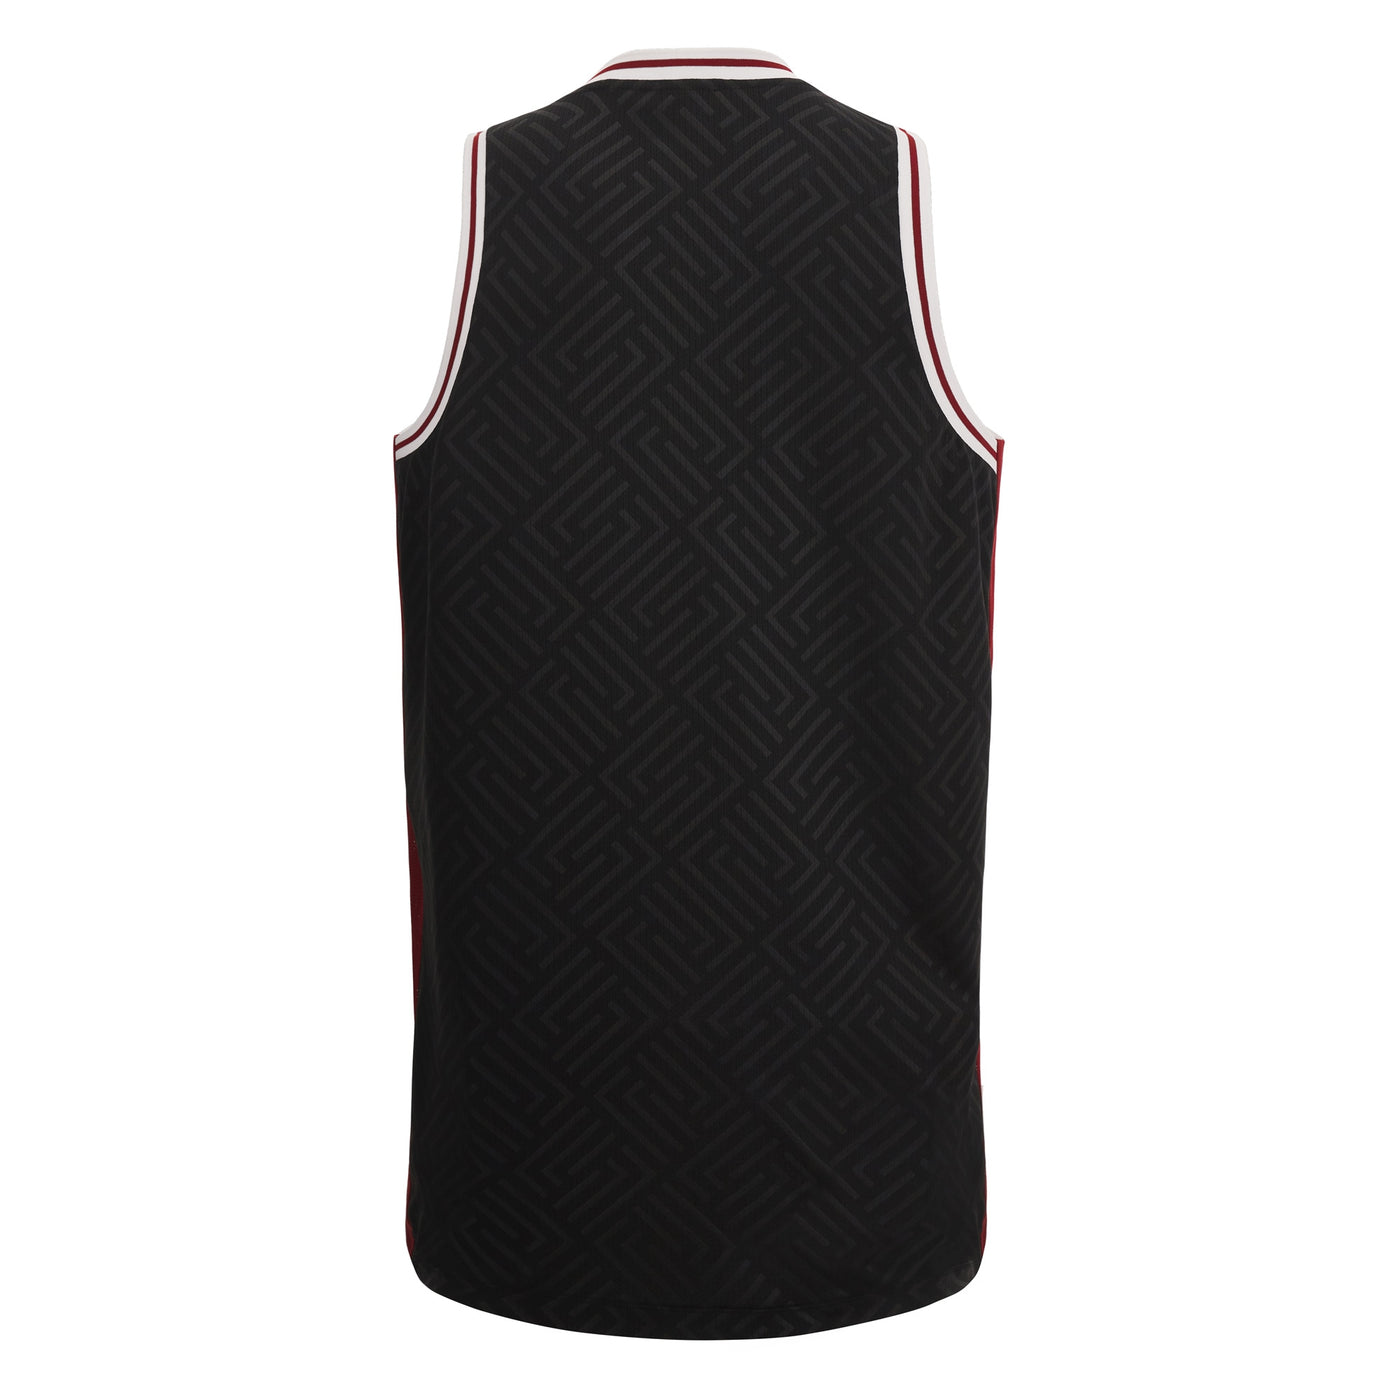 Wales Rugby World Cup 23 Men's Singlet